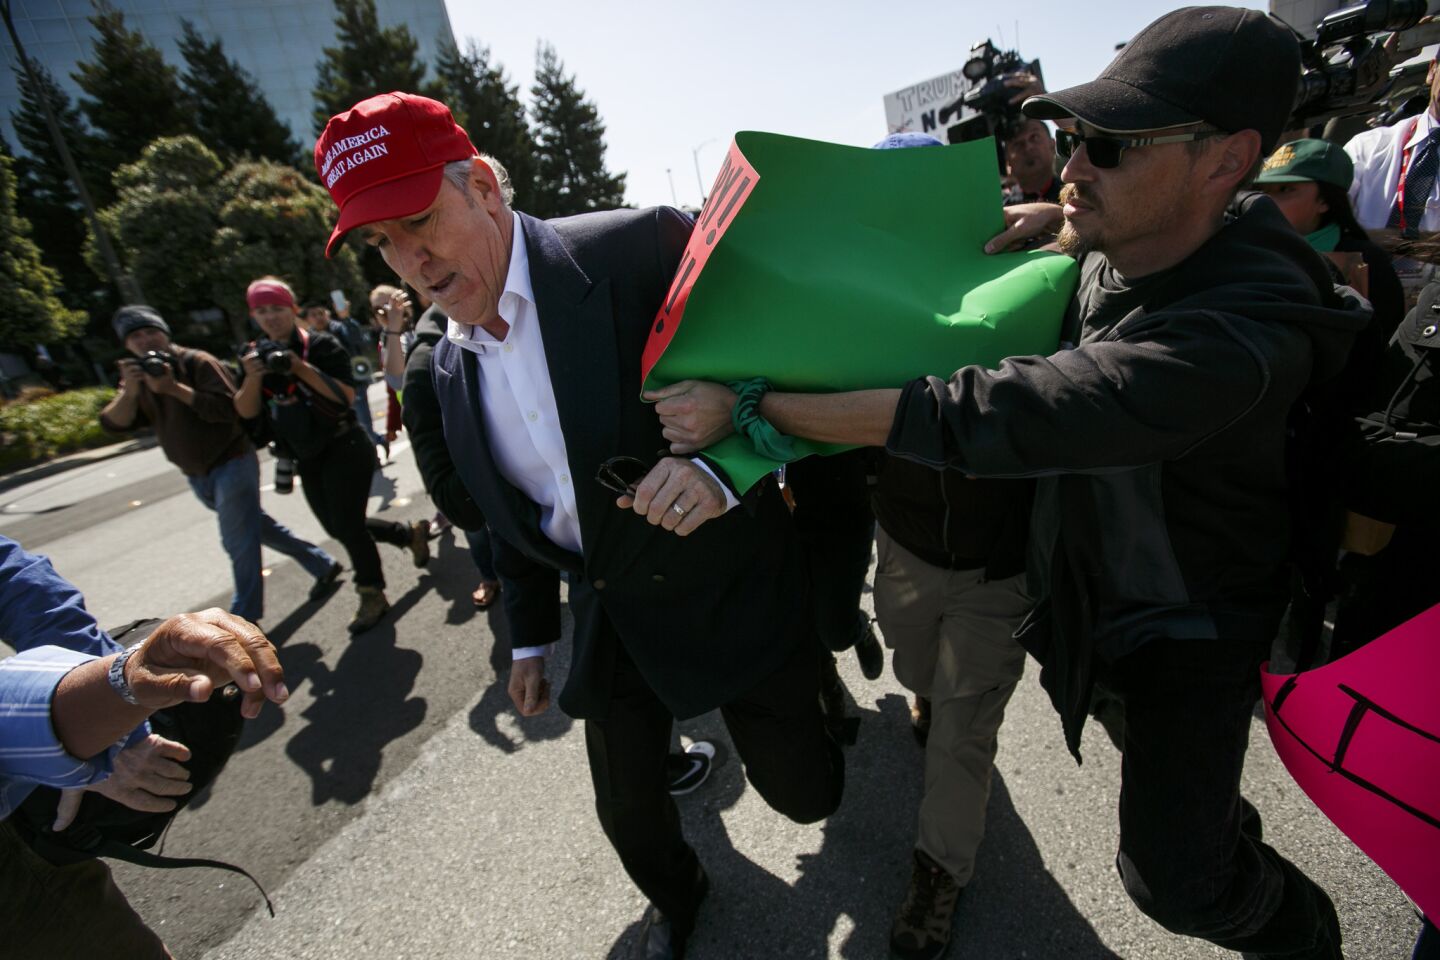 A Donald Trump supporter is surrounded by Trump protesters as he makes his way toward the California Republican Convention, in Burlingame on April 29, 2016/